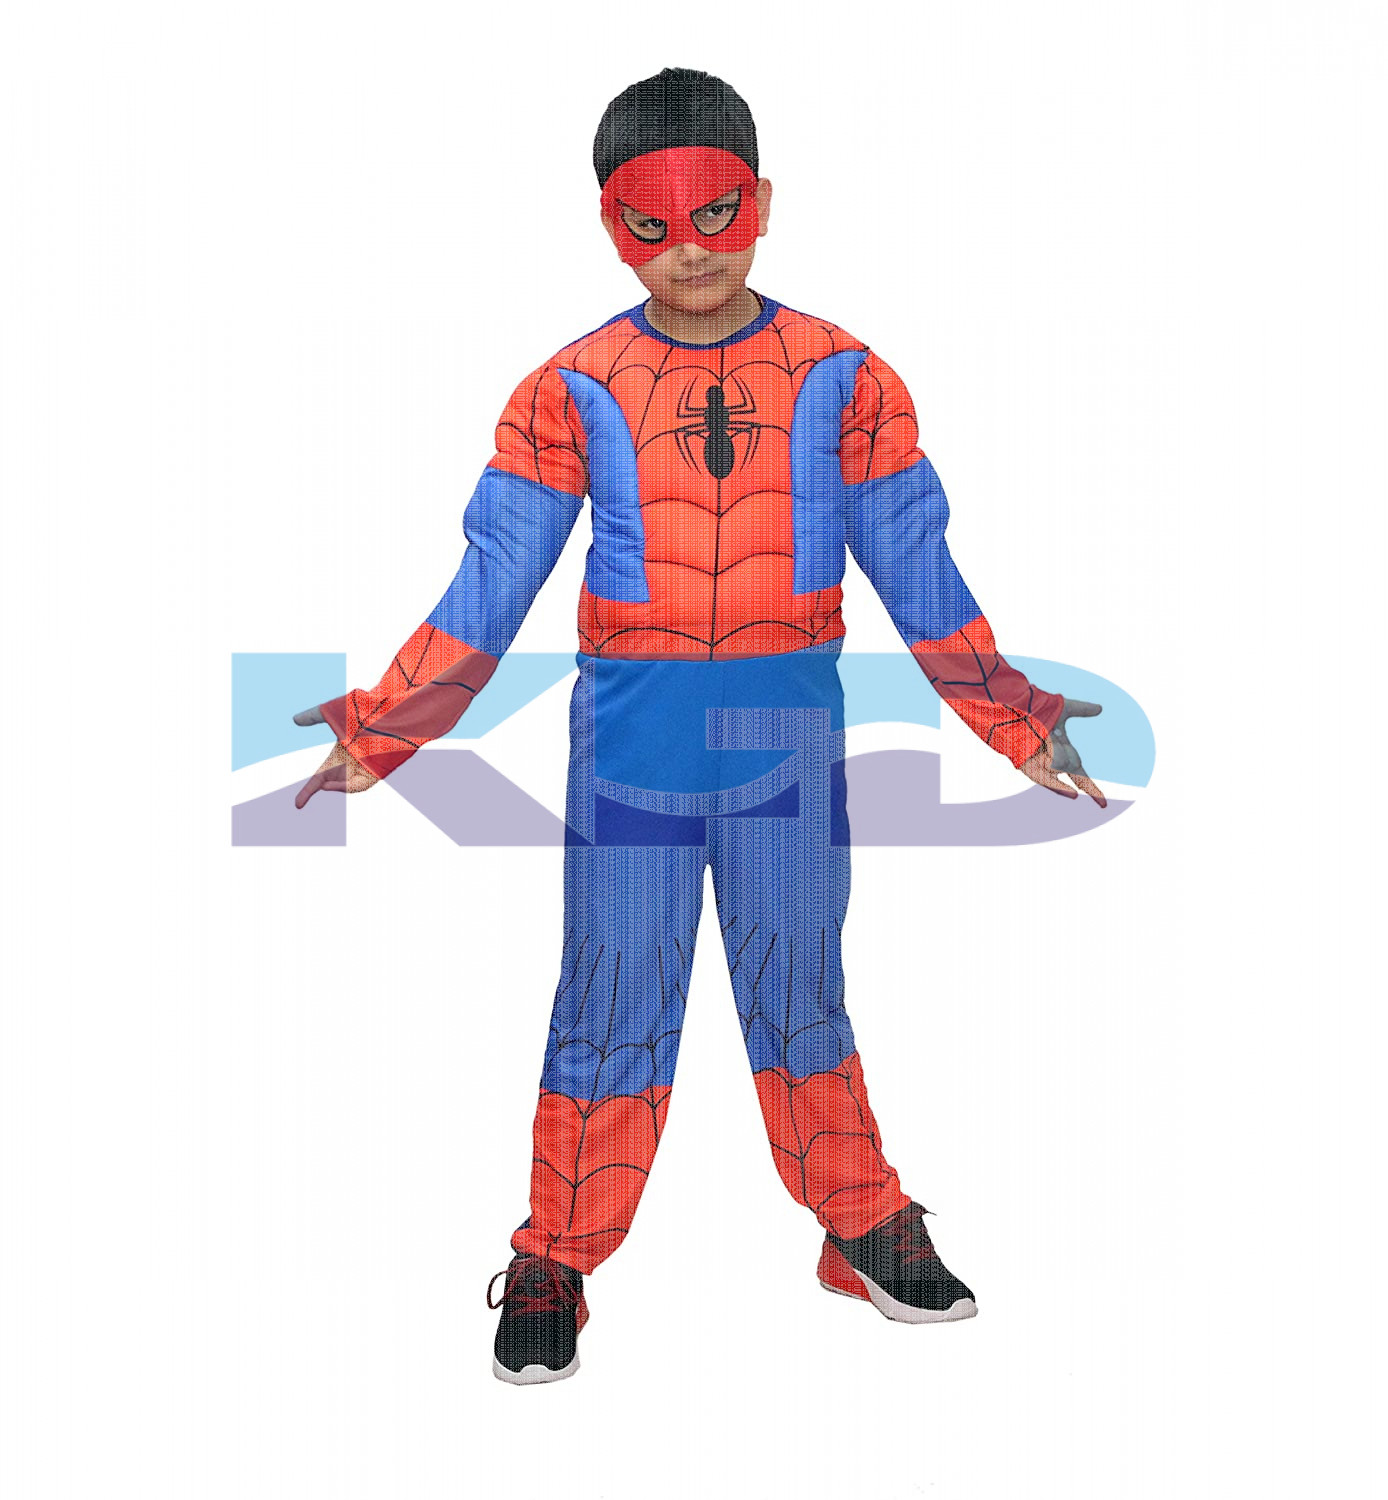 Spider imported fancy dress for kids,Cartoon/superhero Costume for School Annual function/Theme Party/Competition/Stage Shows Dress